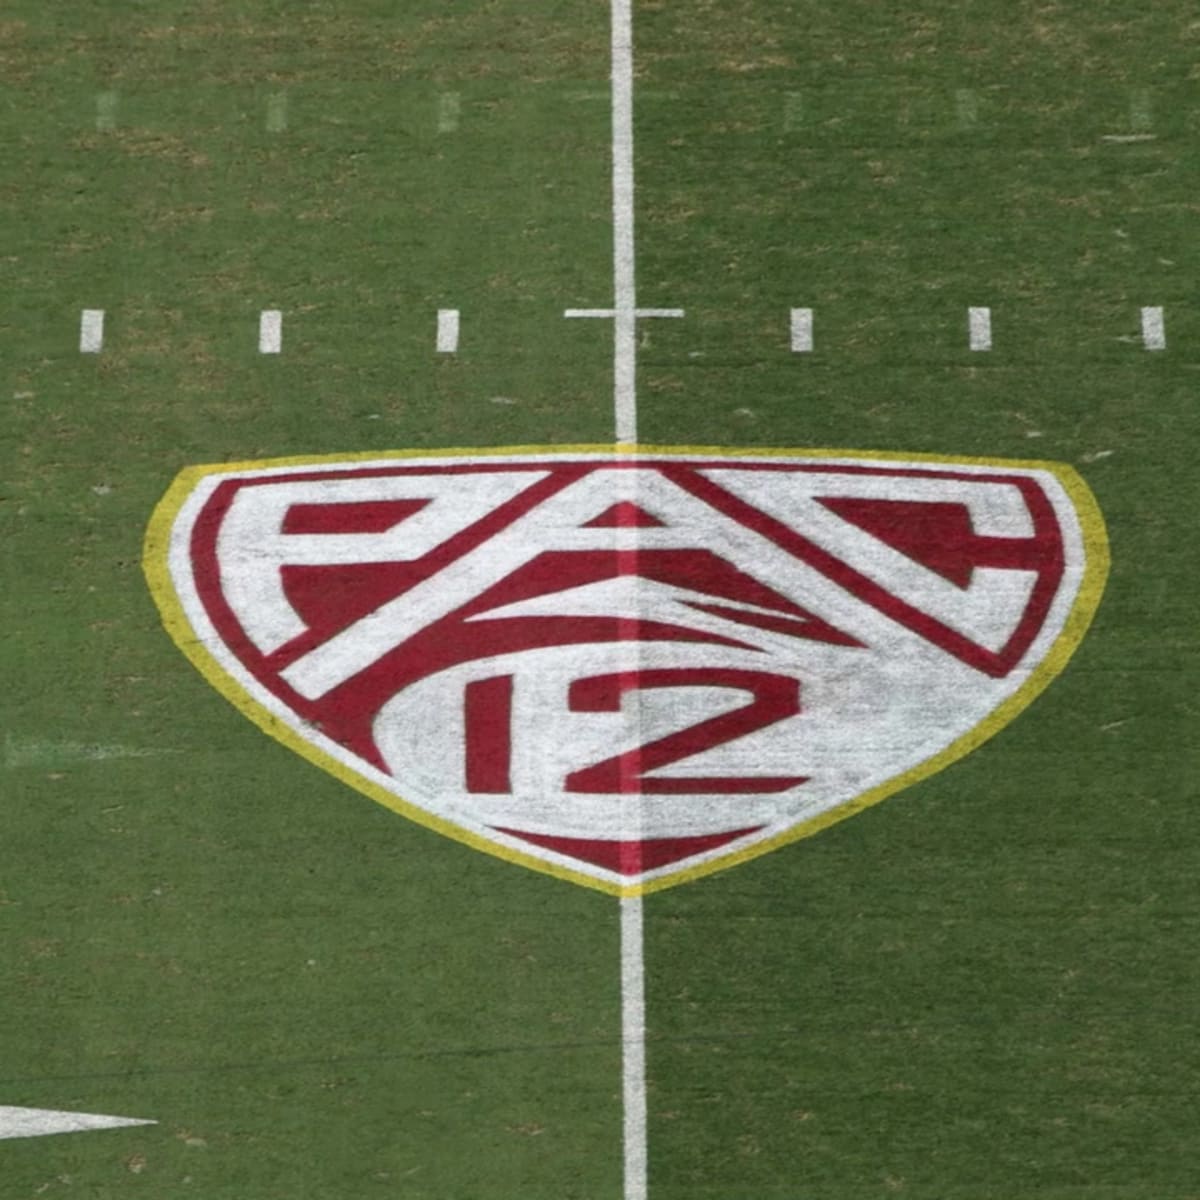 Pac-12 officials lambasted for picking up flag in Arizona State vs